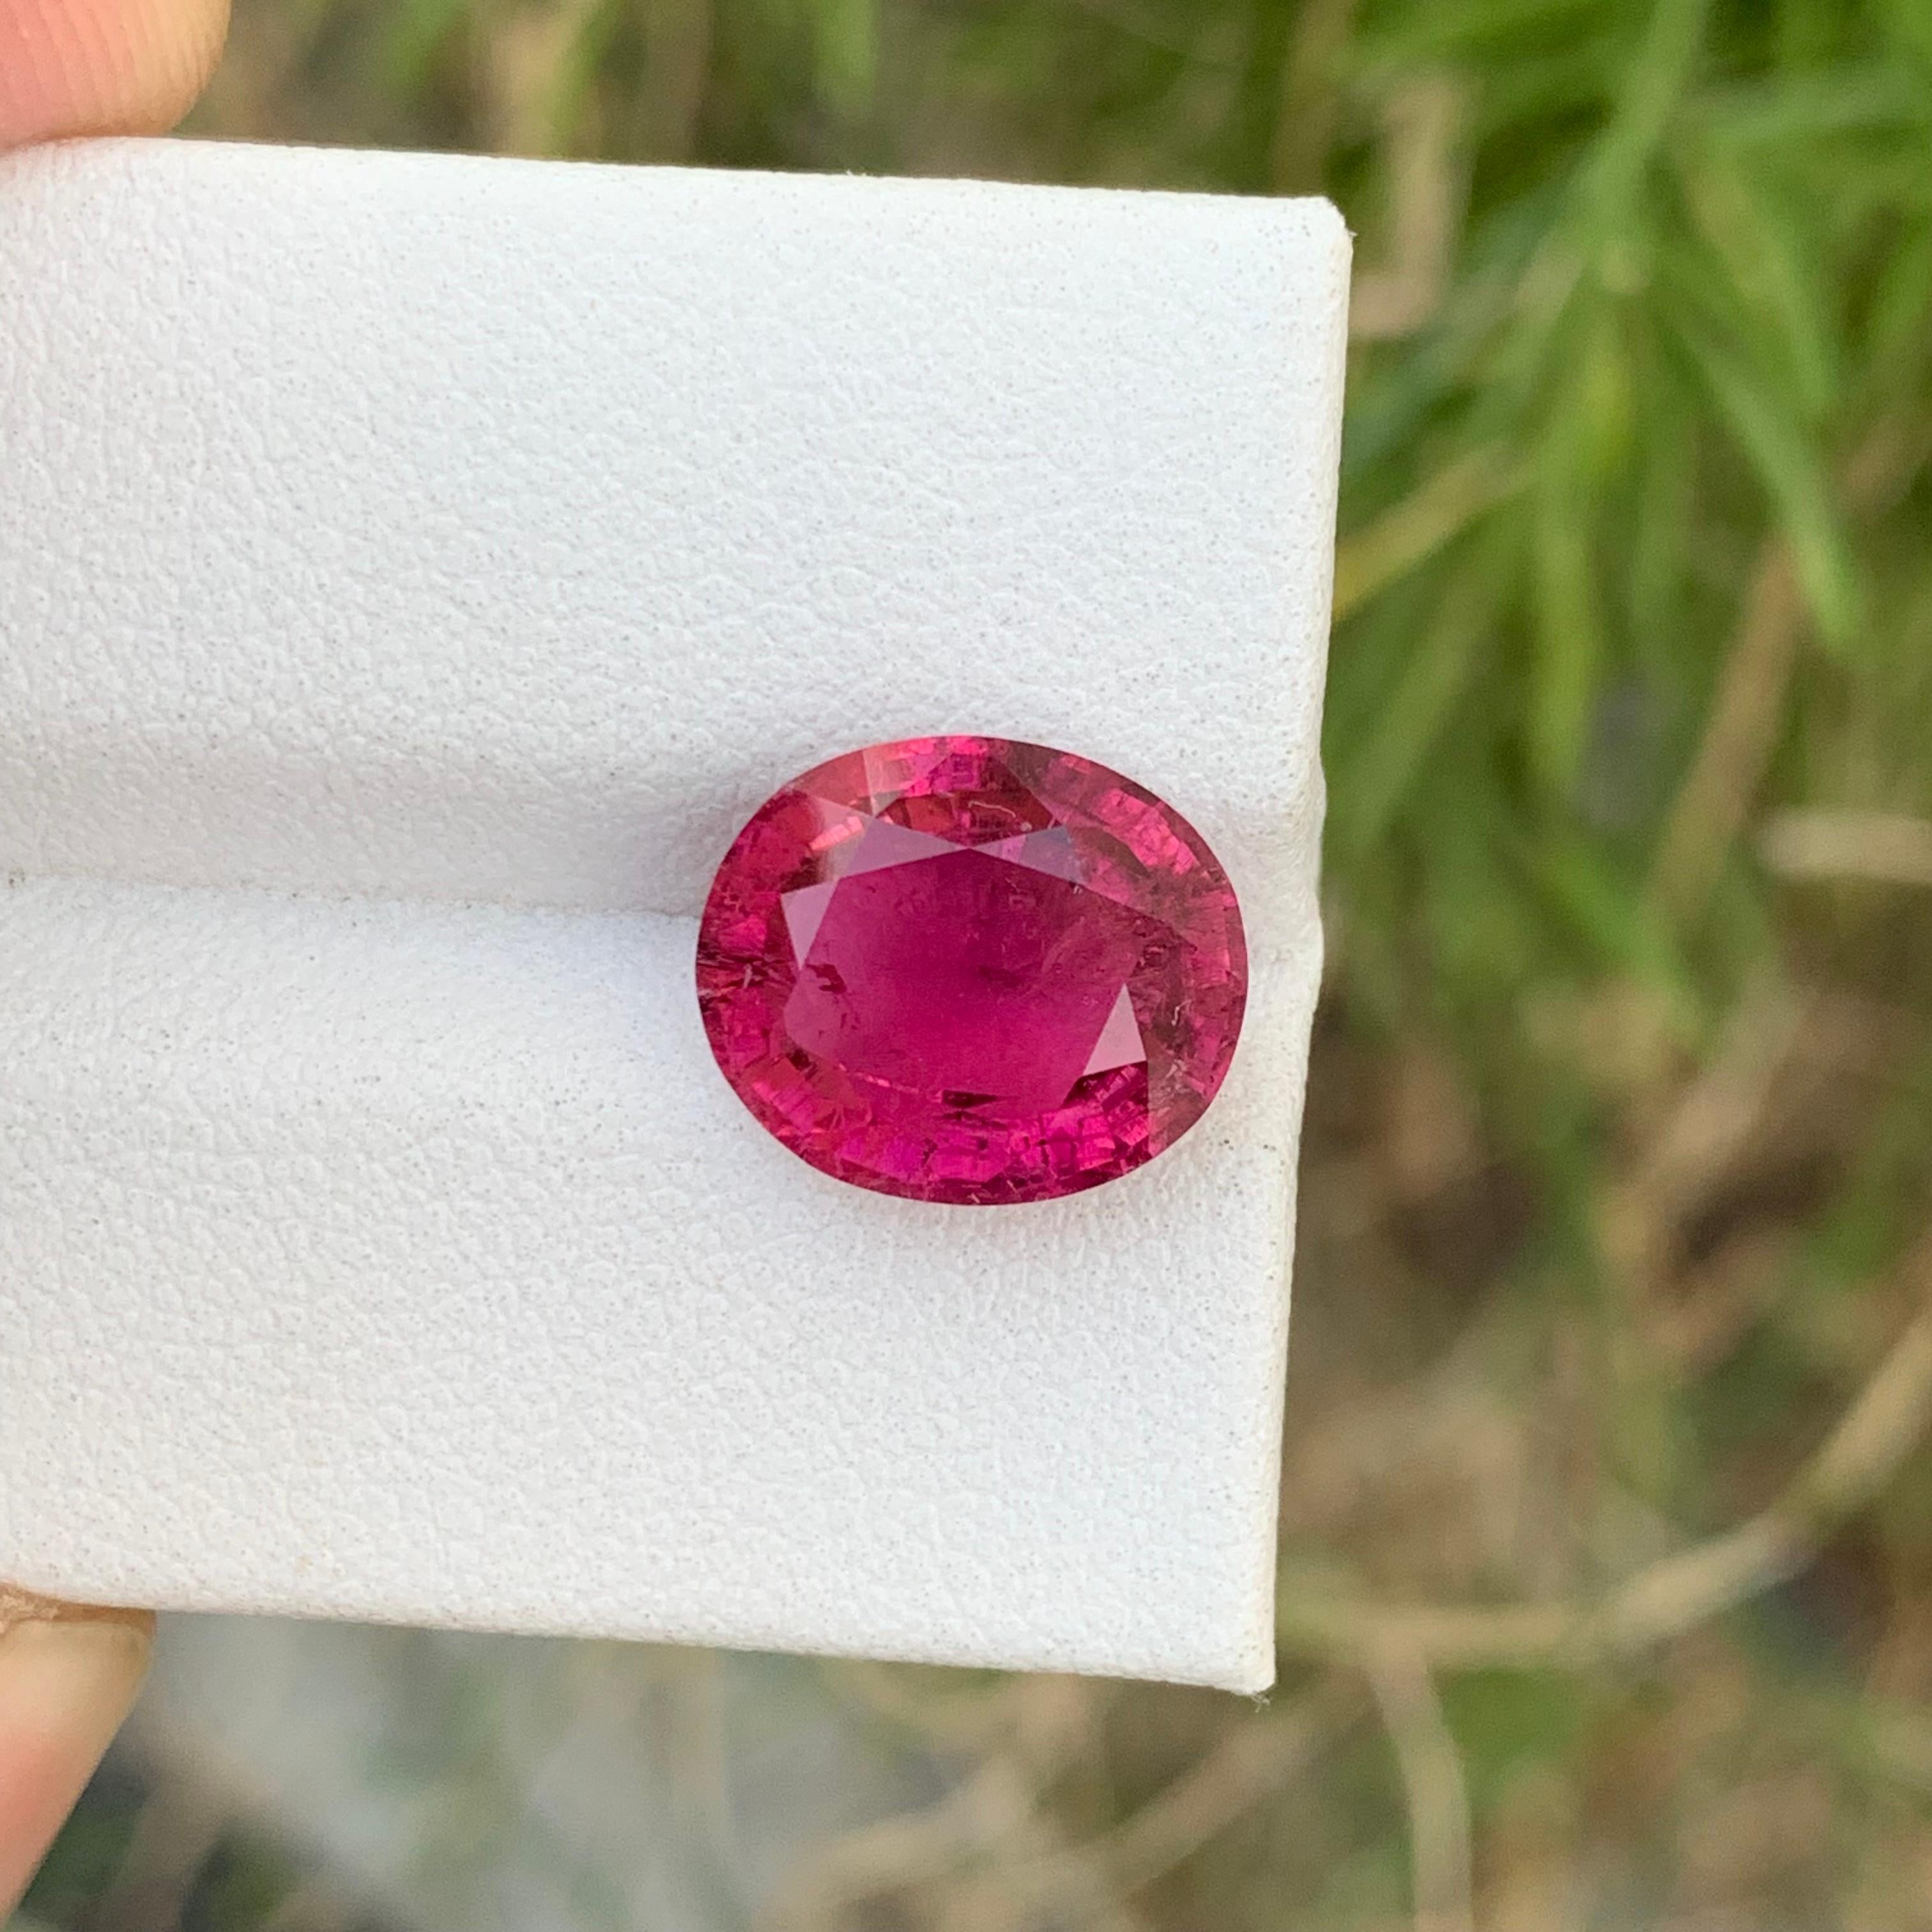 Oval Cut 4.70 Carat Glamorous Loose Rubellite Tourmaline Oval Shape Gem For Jewellery  For Sale